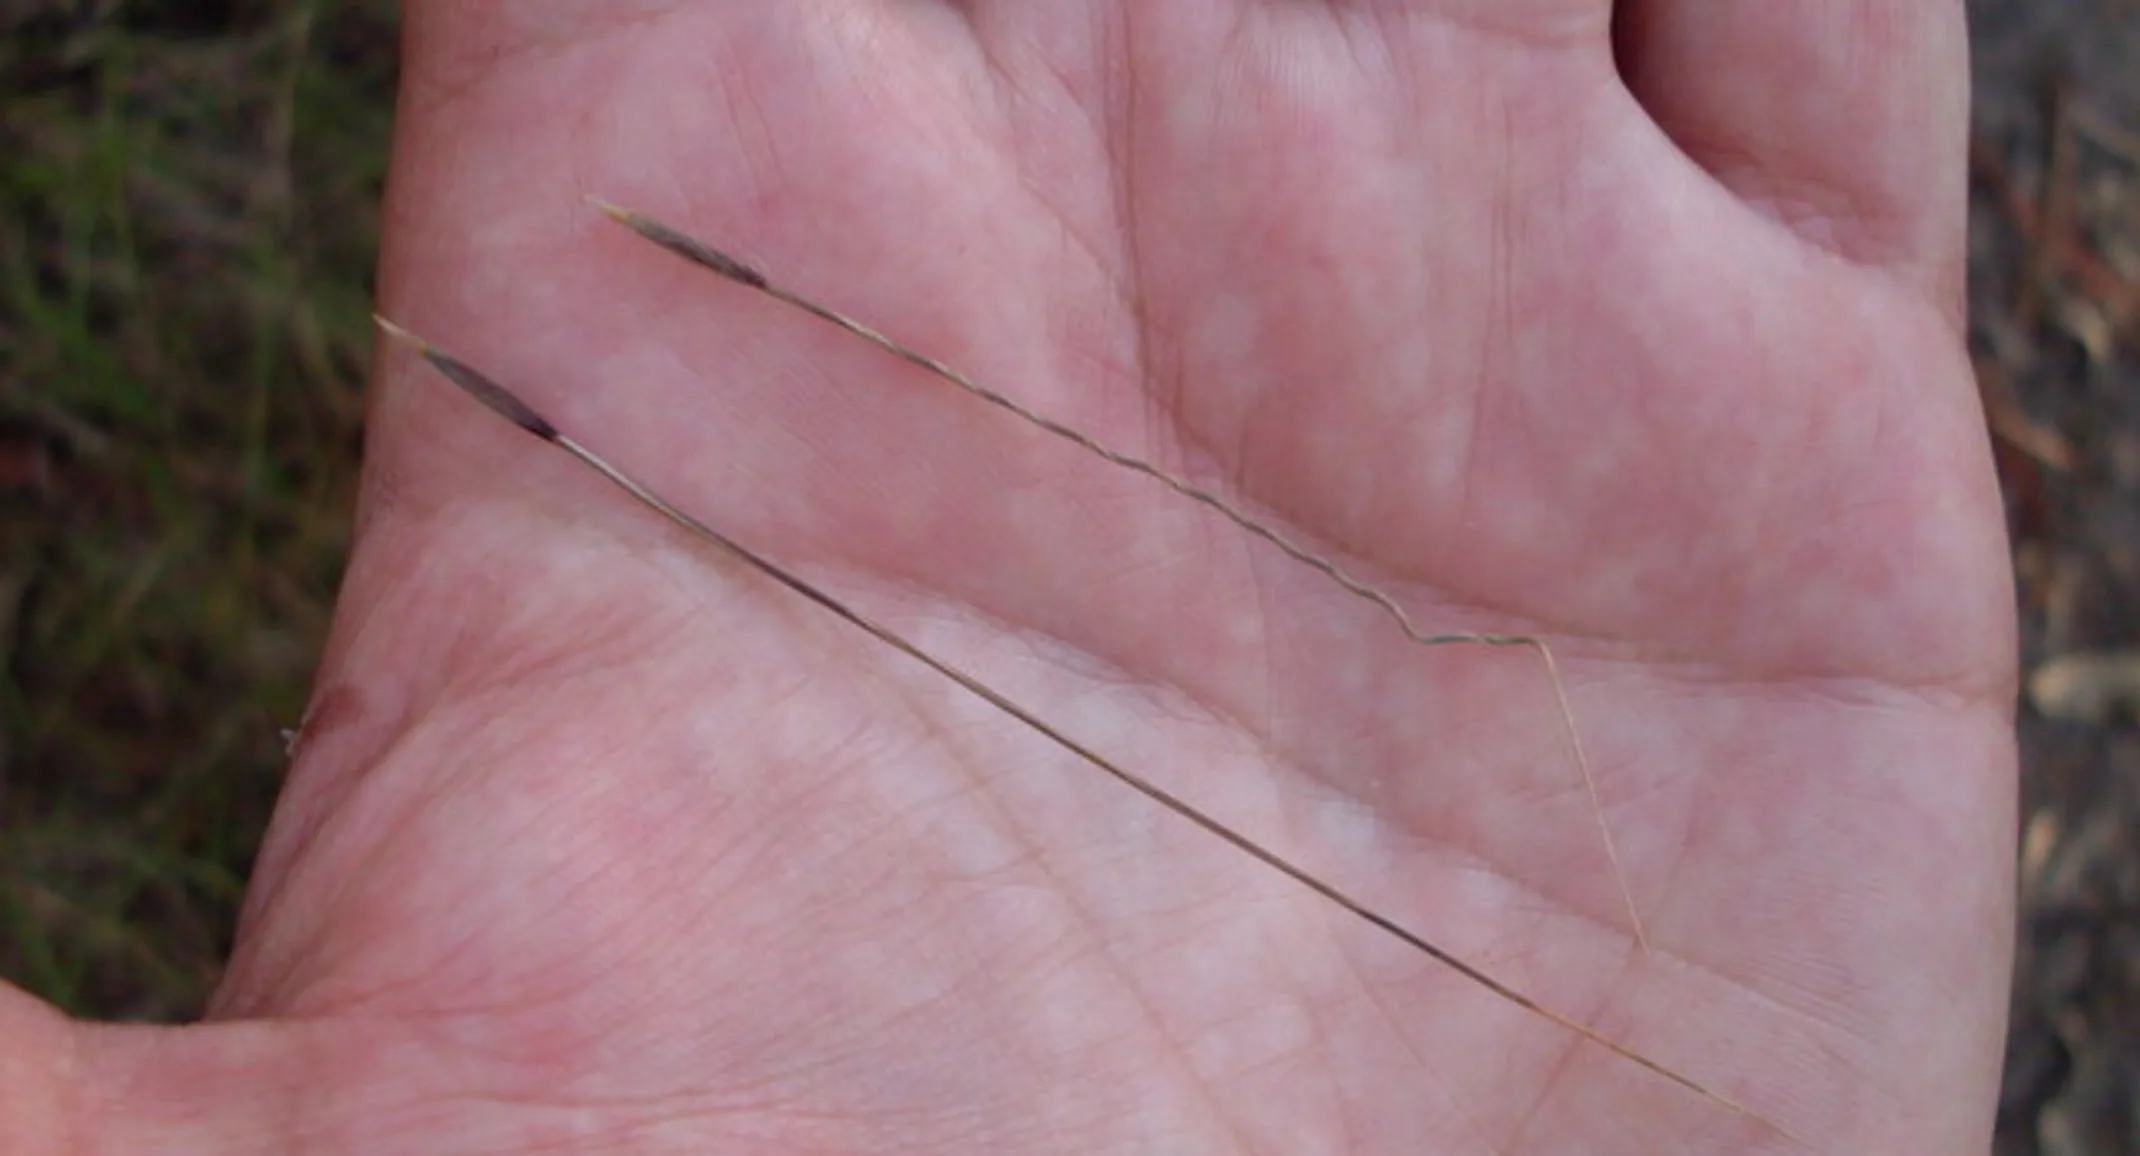 Speargrass on a hand